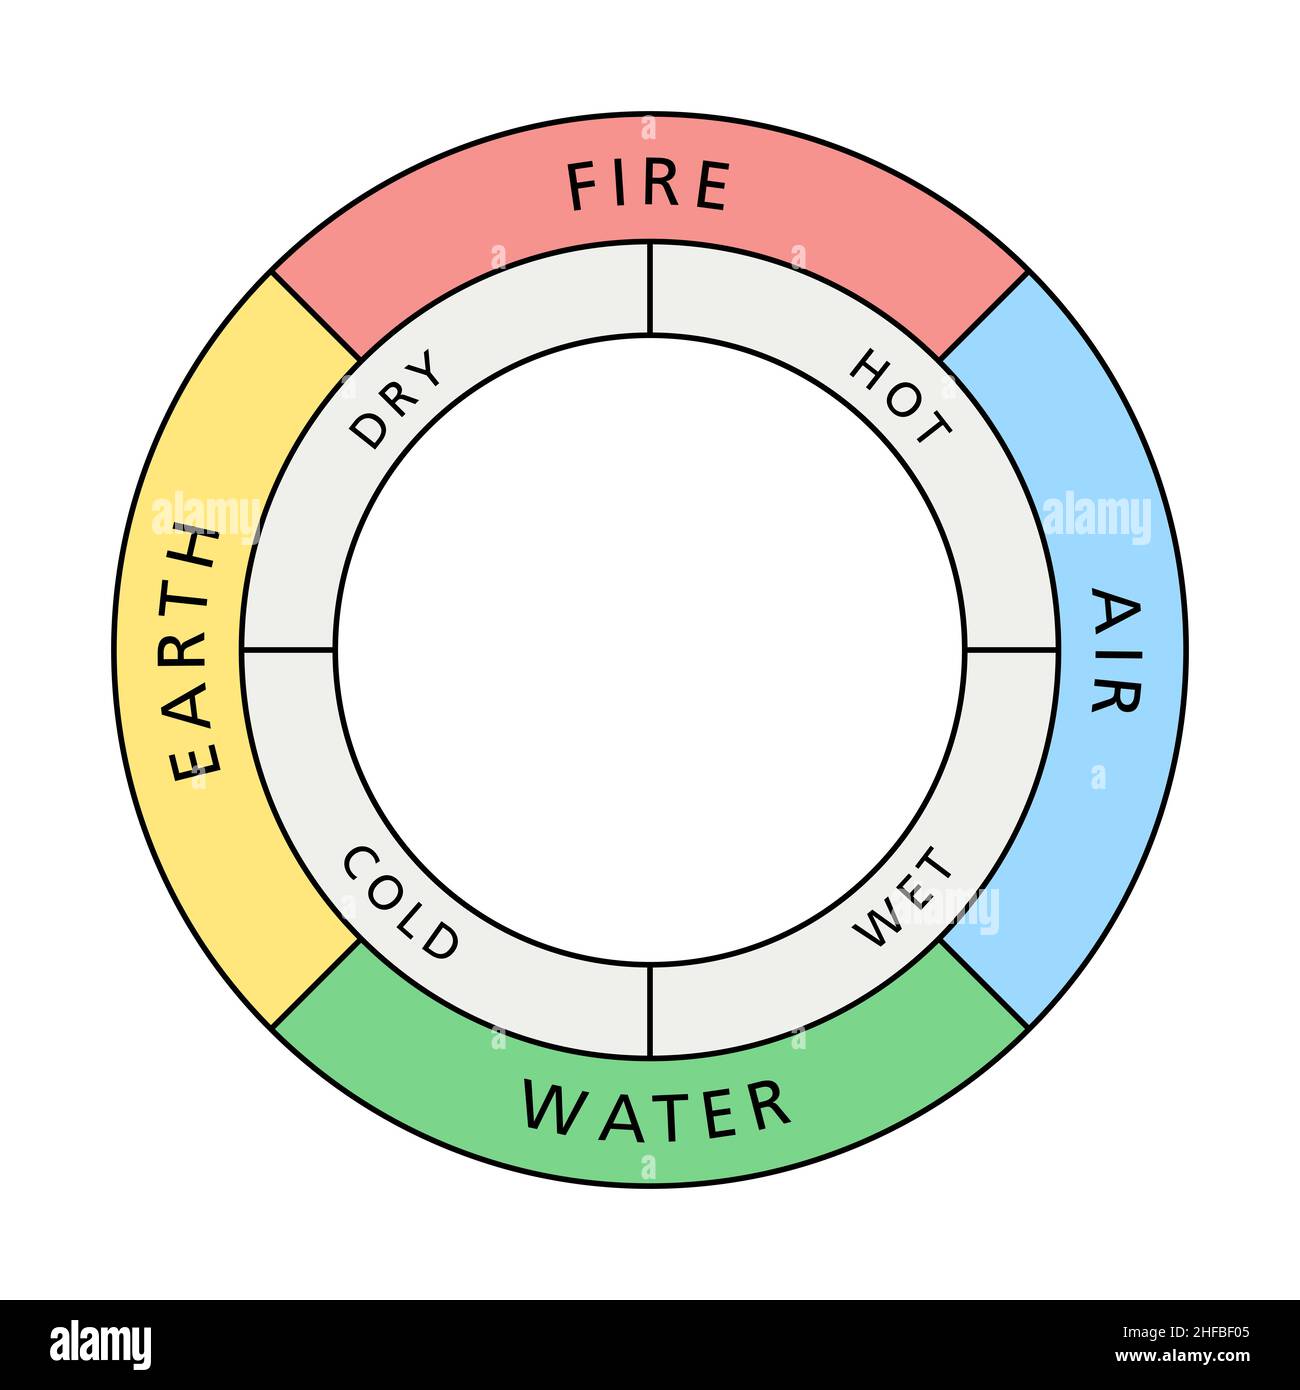 Colored circle of the classical four elements fire, earth, water and air, with their associated qualities hot, dry, cold and wet. Stock Photo